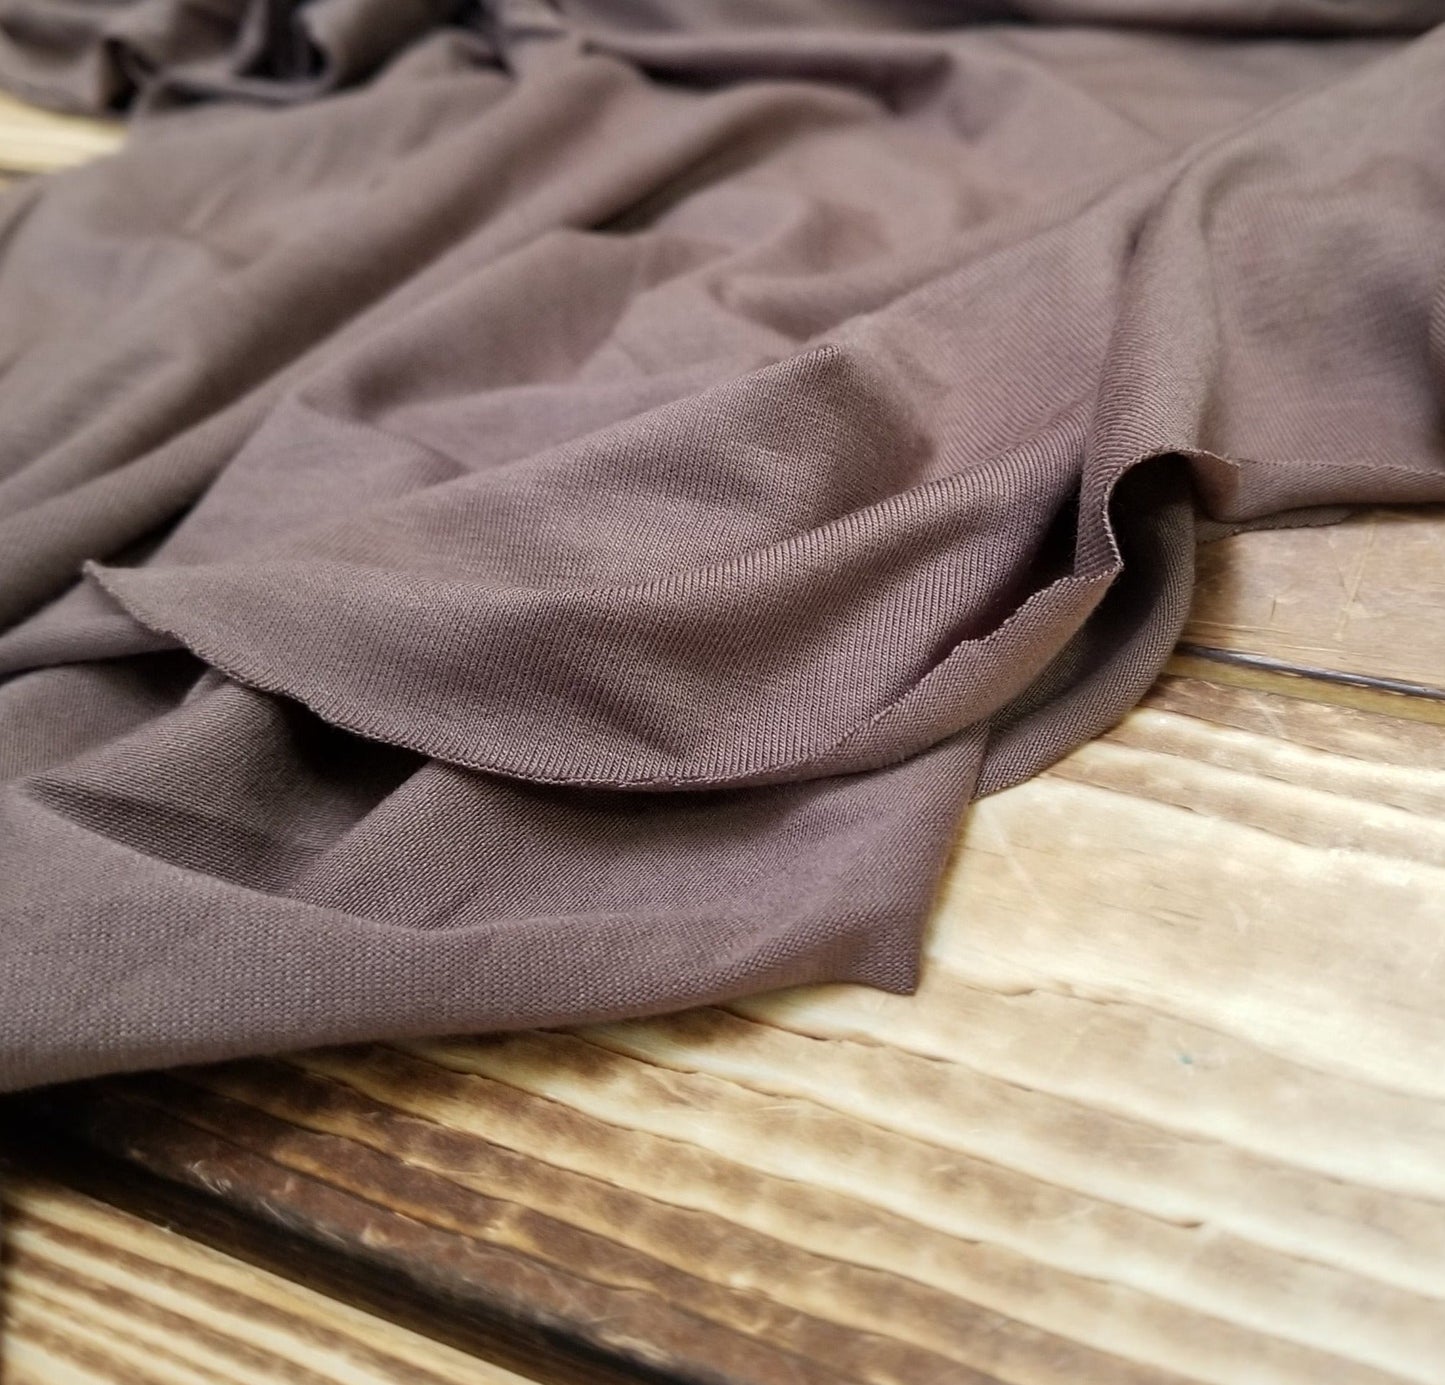 LA FINCH Bamboo Rayon Spandex Jersey Knit Chocolate Brown 5.9 oz-Sold by the Yard